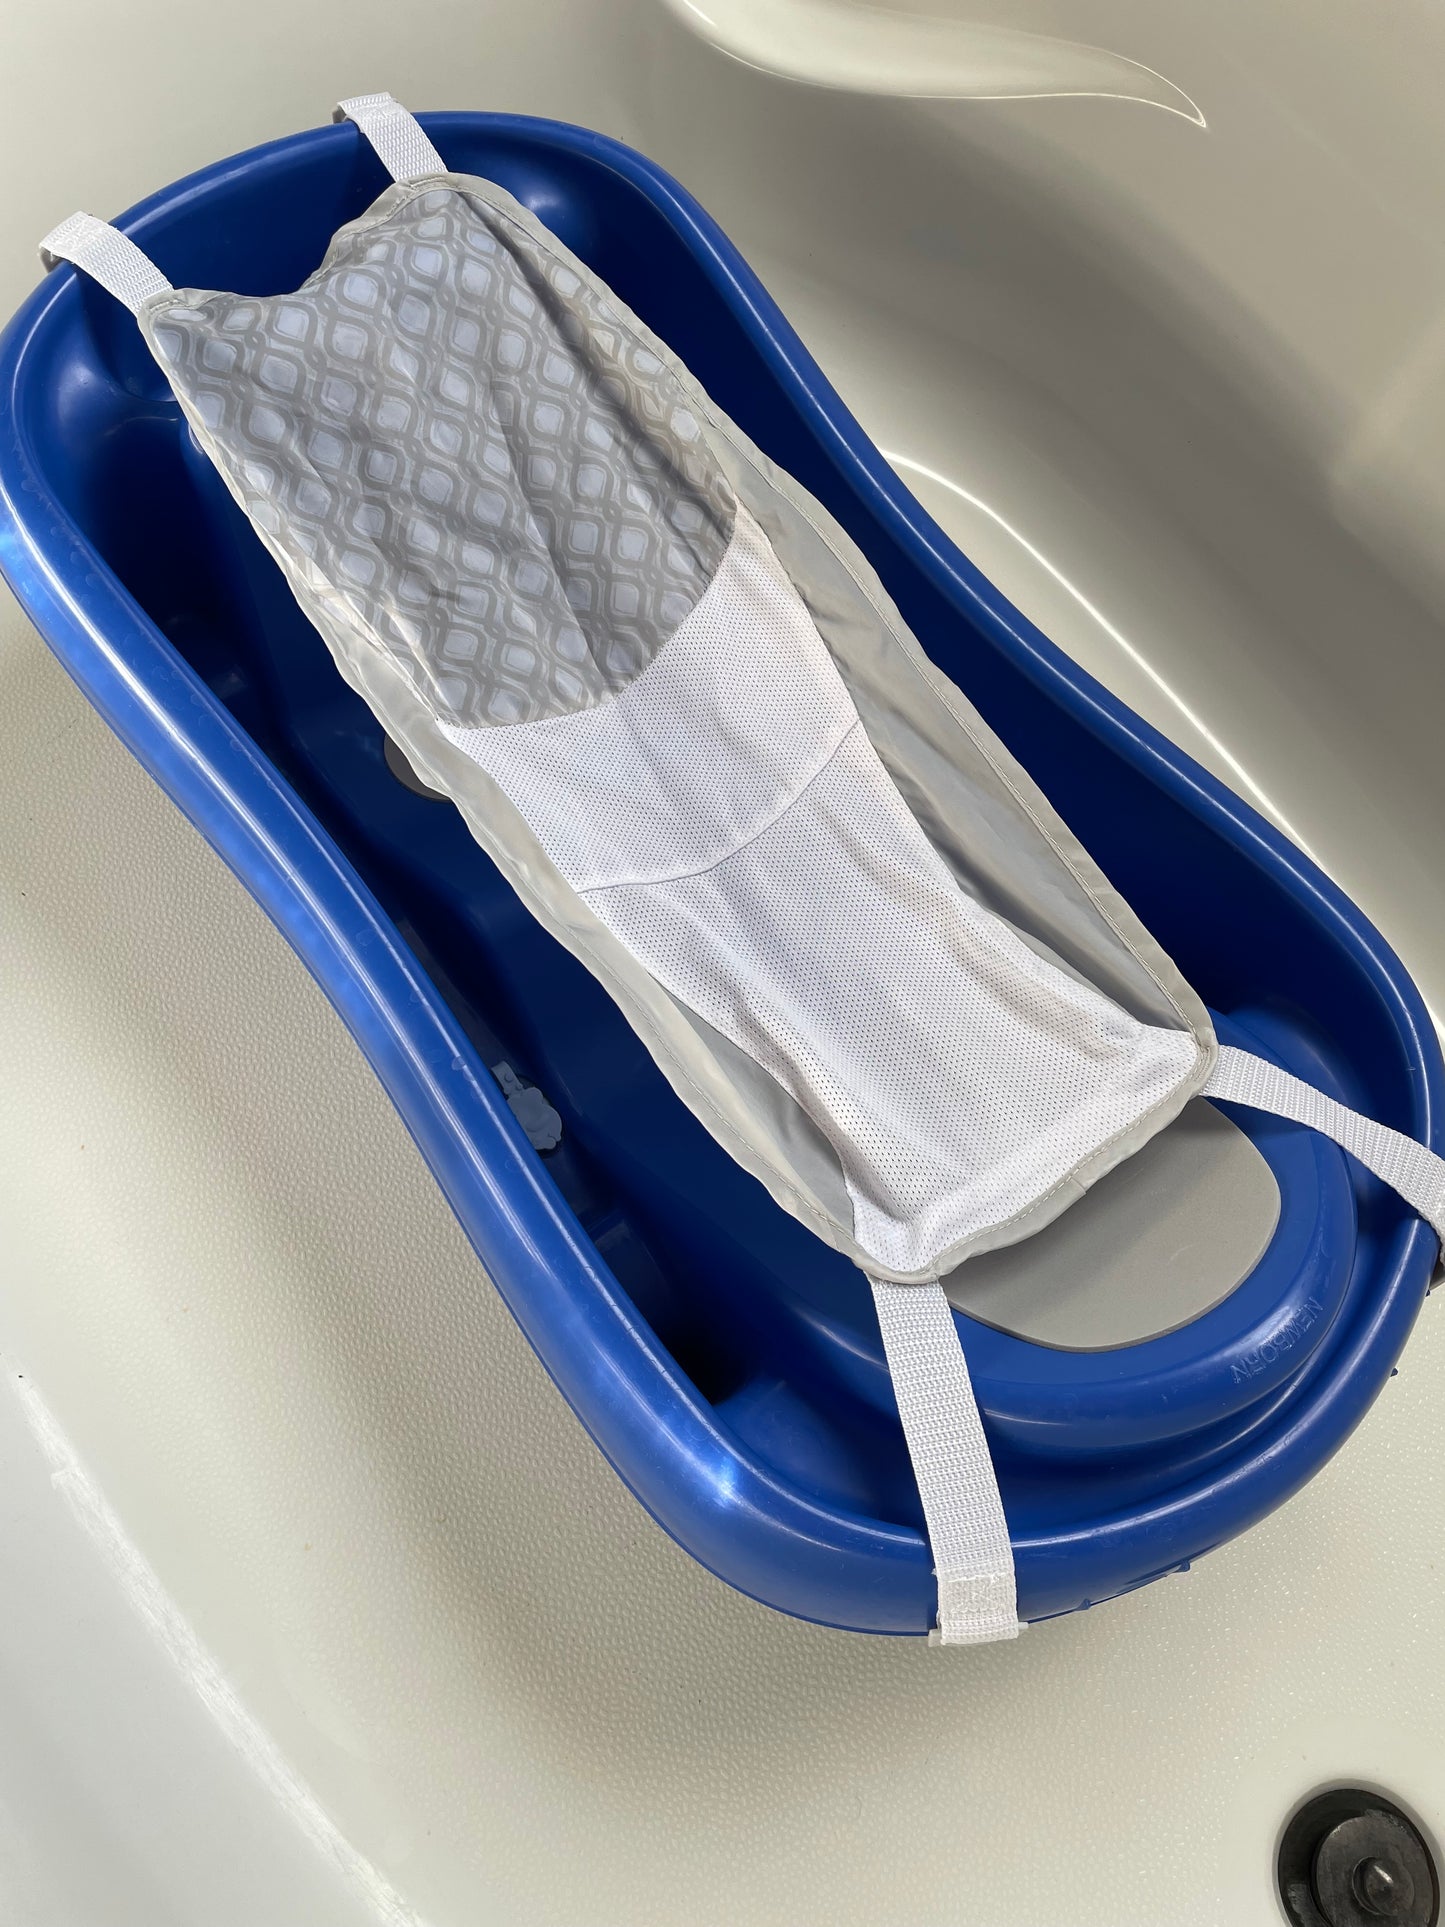 The First Years Newborn-to-Toddler Baby Bath Tub with Sling